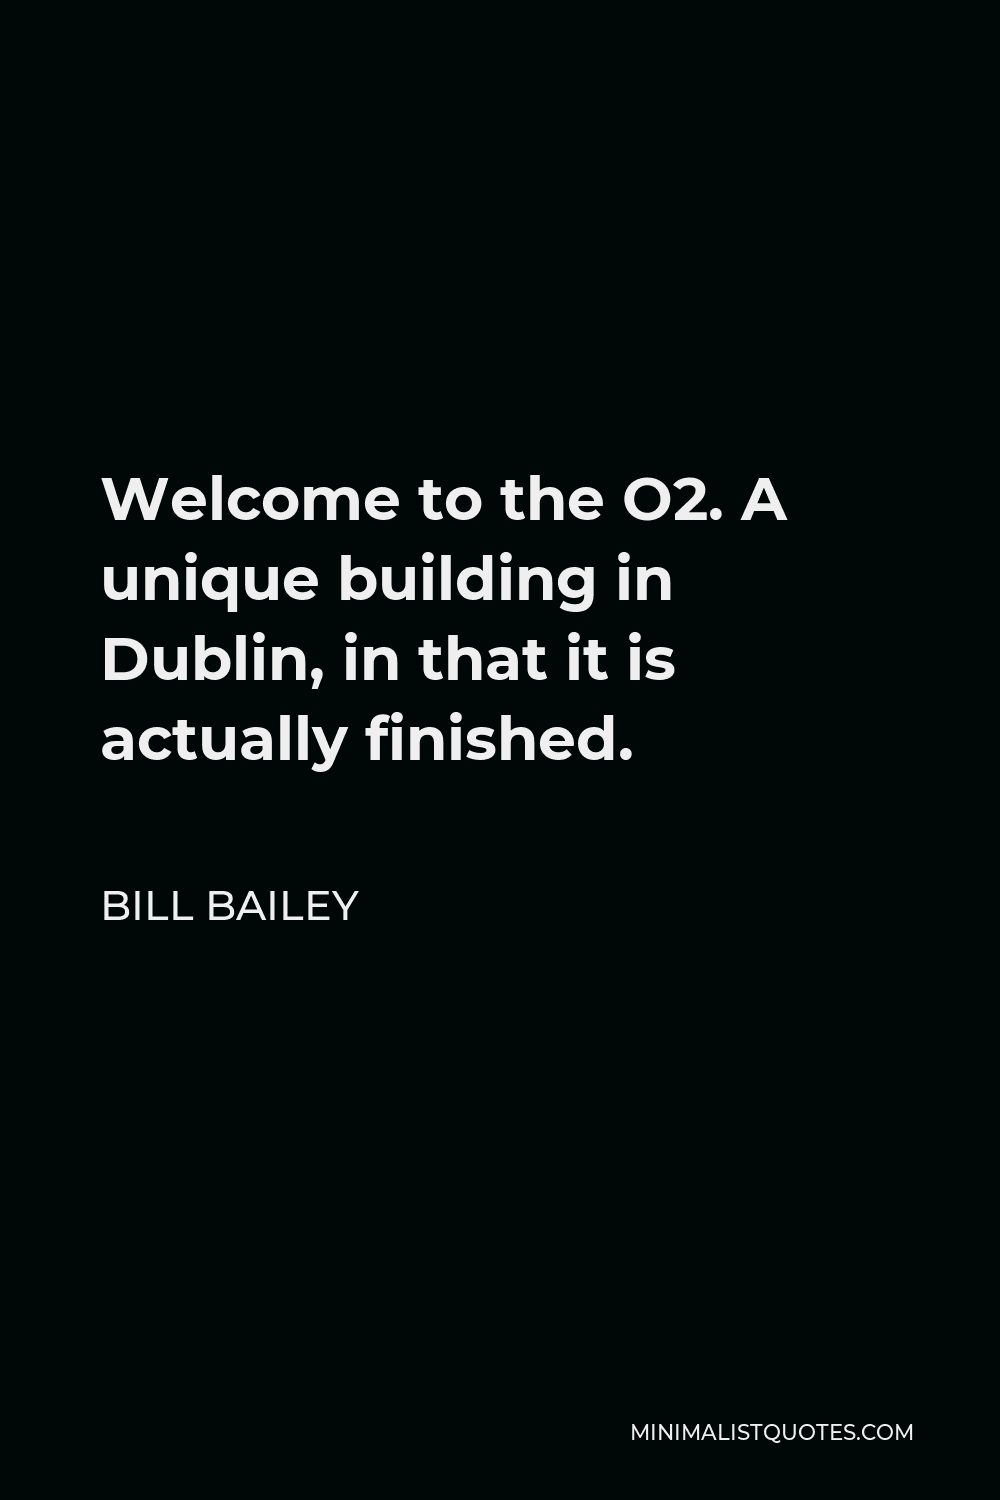 Bill Bailey Quote - Welcome to the O2. A unique building in Dublin, in that it is actually finished.